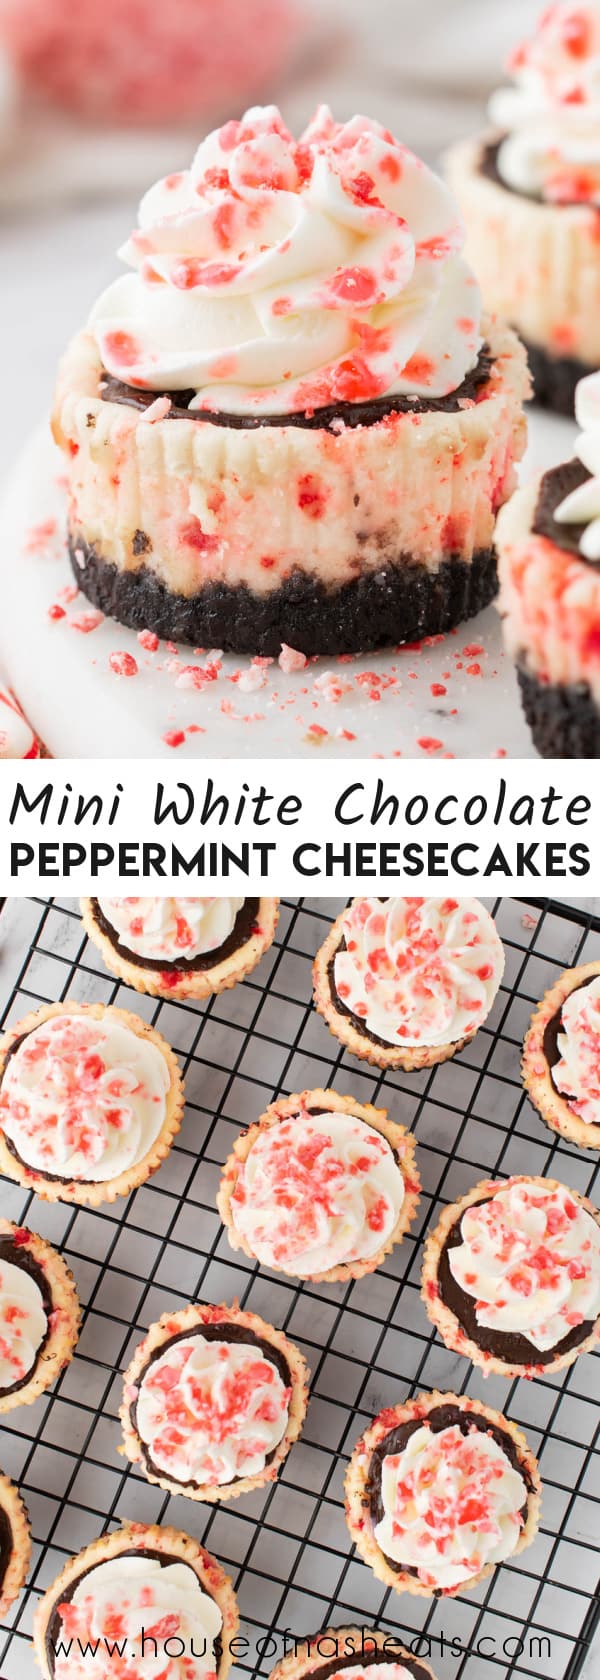 A collage of images of mini white chocolate peppermint cheesecakes with text overlay.